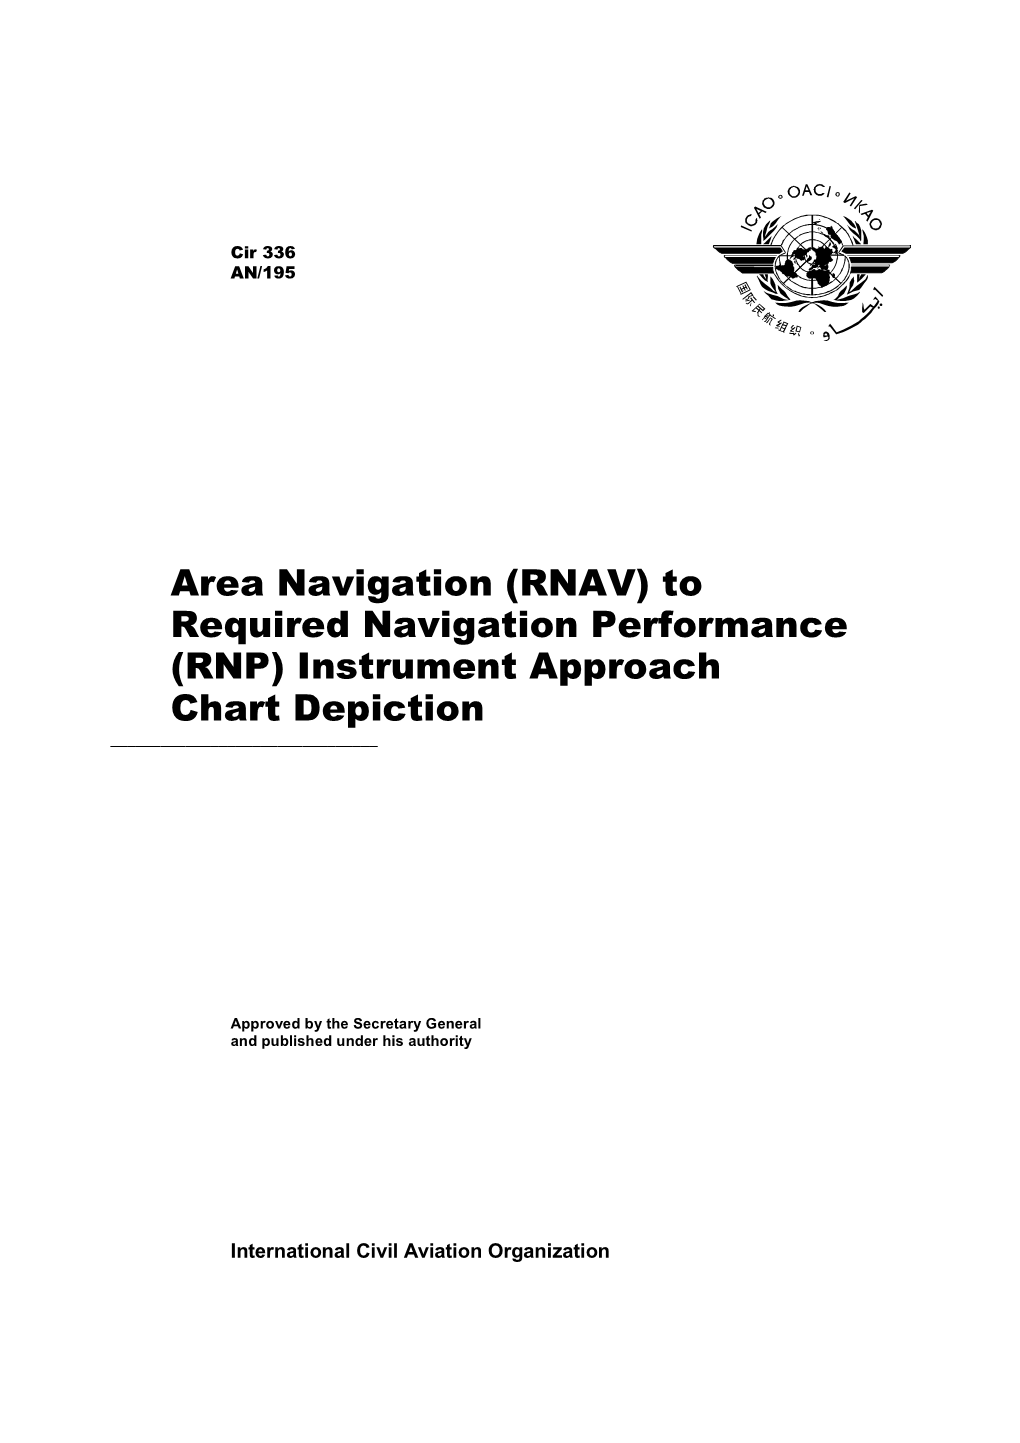 Area Navigation (RNAV) to Required Navigation Performance (RNP) Instrument Approach Chart Depiction ______